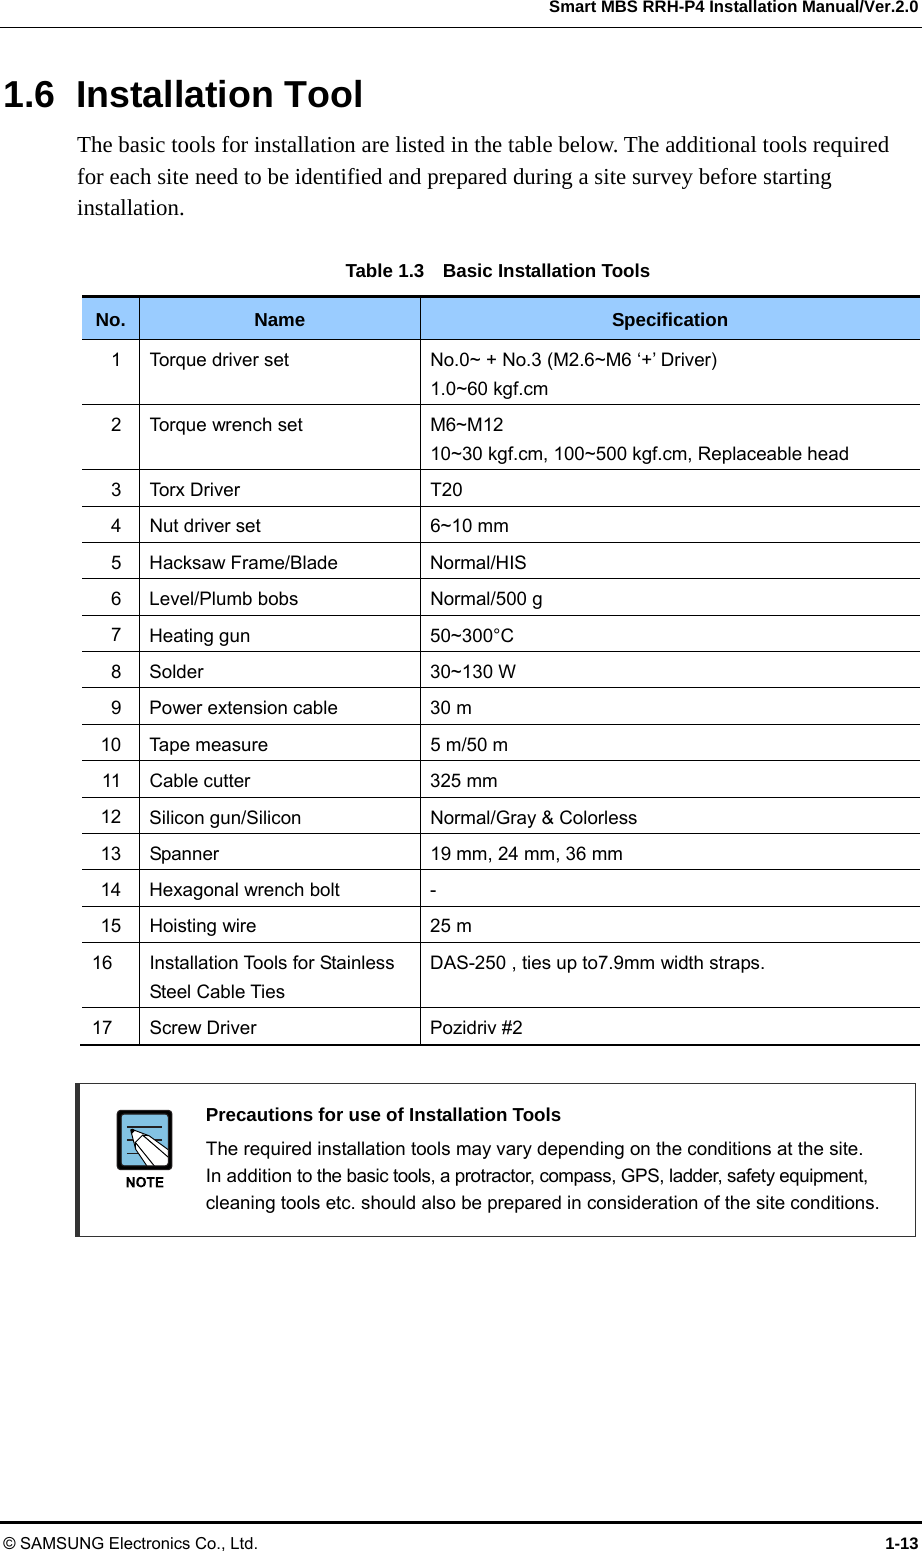  Smart MBS RRH-P4 Installation Manual/Ver.2.0 © SAMSUNG Electronics Co., Ltd.  1-13 1.6 Installation Tool The basic tools for installation are listed in the table below. The additional tools required for each site need to be identified and prepared during a site survey before starting installation.  Table 1.3    Basic Installation Tools No.  Name  Specification 1  Torque driver set  No.0~ + No.3 (M2.6~M6 ‘+’ Driver) 1.0~60 kgf.cm 2 Torque wrench set  M6~M12 10~30 kgf.cm, 100~500 kgf.cm, Replaceable head 3 Torx Driver  T20 4  Nut driver set  6~10 mm 5  Hacksaw Frame/Blade  Normal/HIS 6  Level/Plumb bobs  Normal/500 g 7  Heating gun  50~300°C 8  Solder 30~130 W 9  Power extension cable  30 m 10  Tape measure  5 m/50 m 11  Cable cutter  325 mm 12  Silicon gun/Silicon  Normal/Gray &amp; Colorless   13  Spanner  19 mm, 24 mm, 36 mm 14 Hexagonal wrench bolt  - 15 Hoisting wire  25 m 16  Installation Tools for Stainless Steel Cable Ties DAS-250 , ties up to7.9mm width straps. 17 Screw Driver  Pozidriv #2   Precautions for use of Installation Tools   The required installation tools may vary depending on the conditions at the site. In addition to the basic tools, a protractor, compass, GPS, ladder, safety equipment, cleaning tools etc. should also be prepared in consideration of the site conditions.  